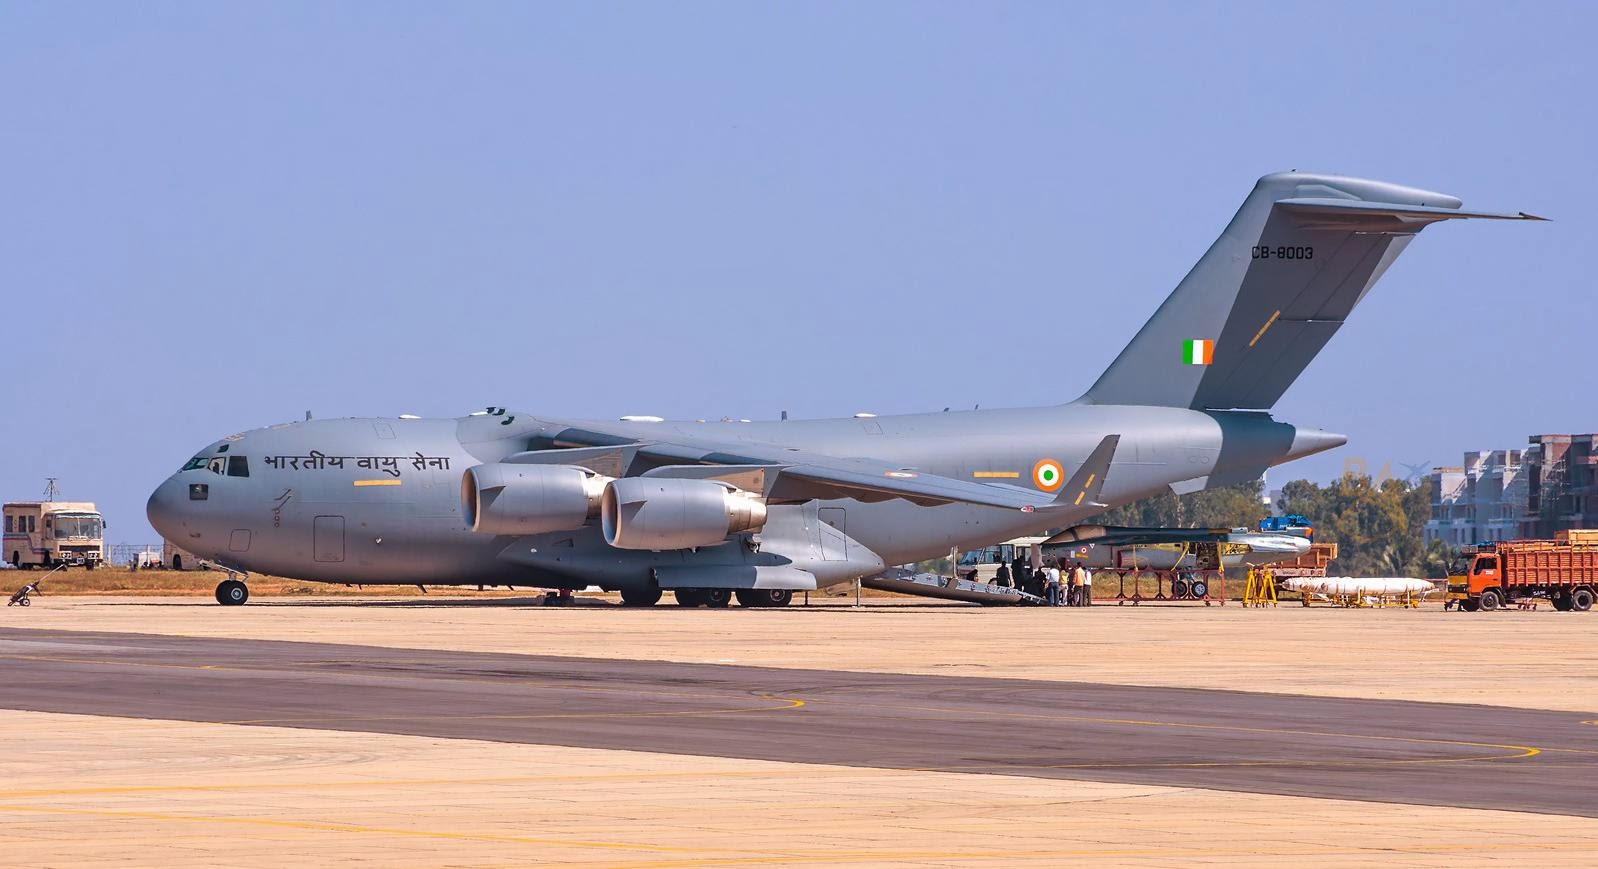 Indian+C-17+Globemaster+III+Military+Transport+Aircraft+with+a+LCA+Tejas+MK+1+Tejas+Payload+(1).jpg